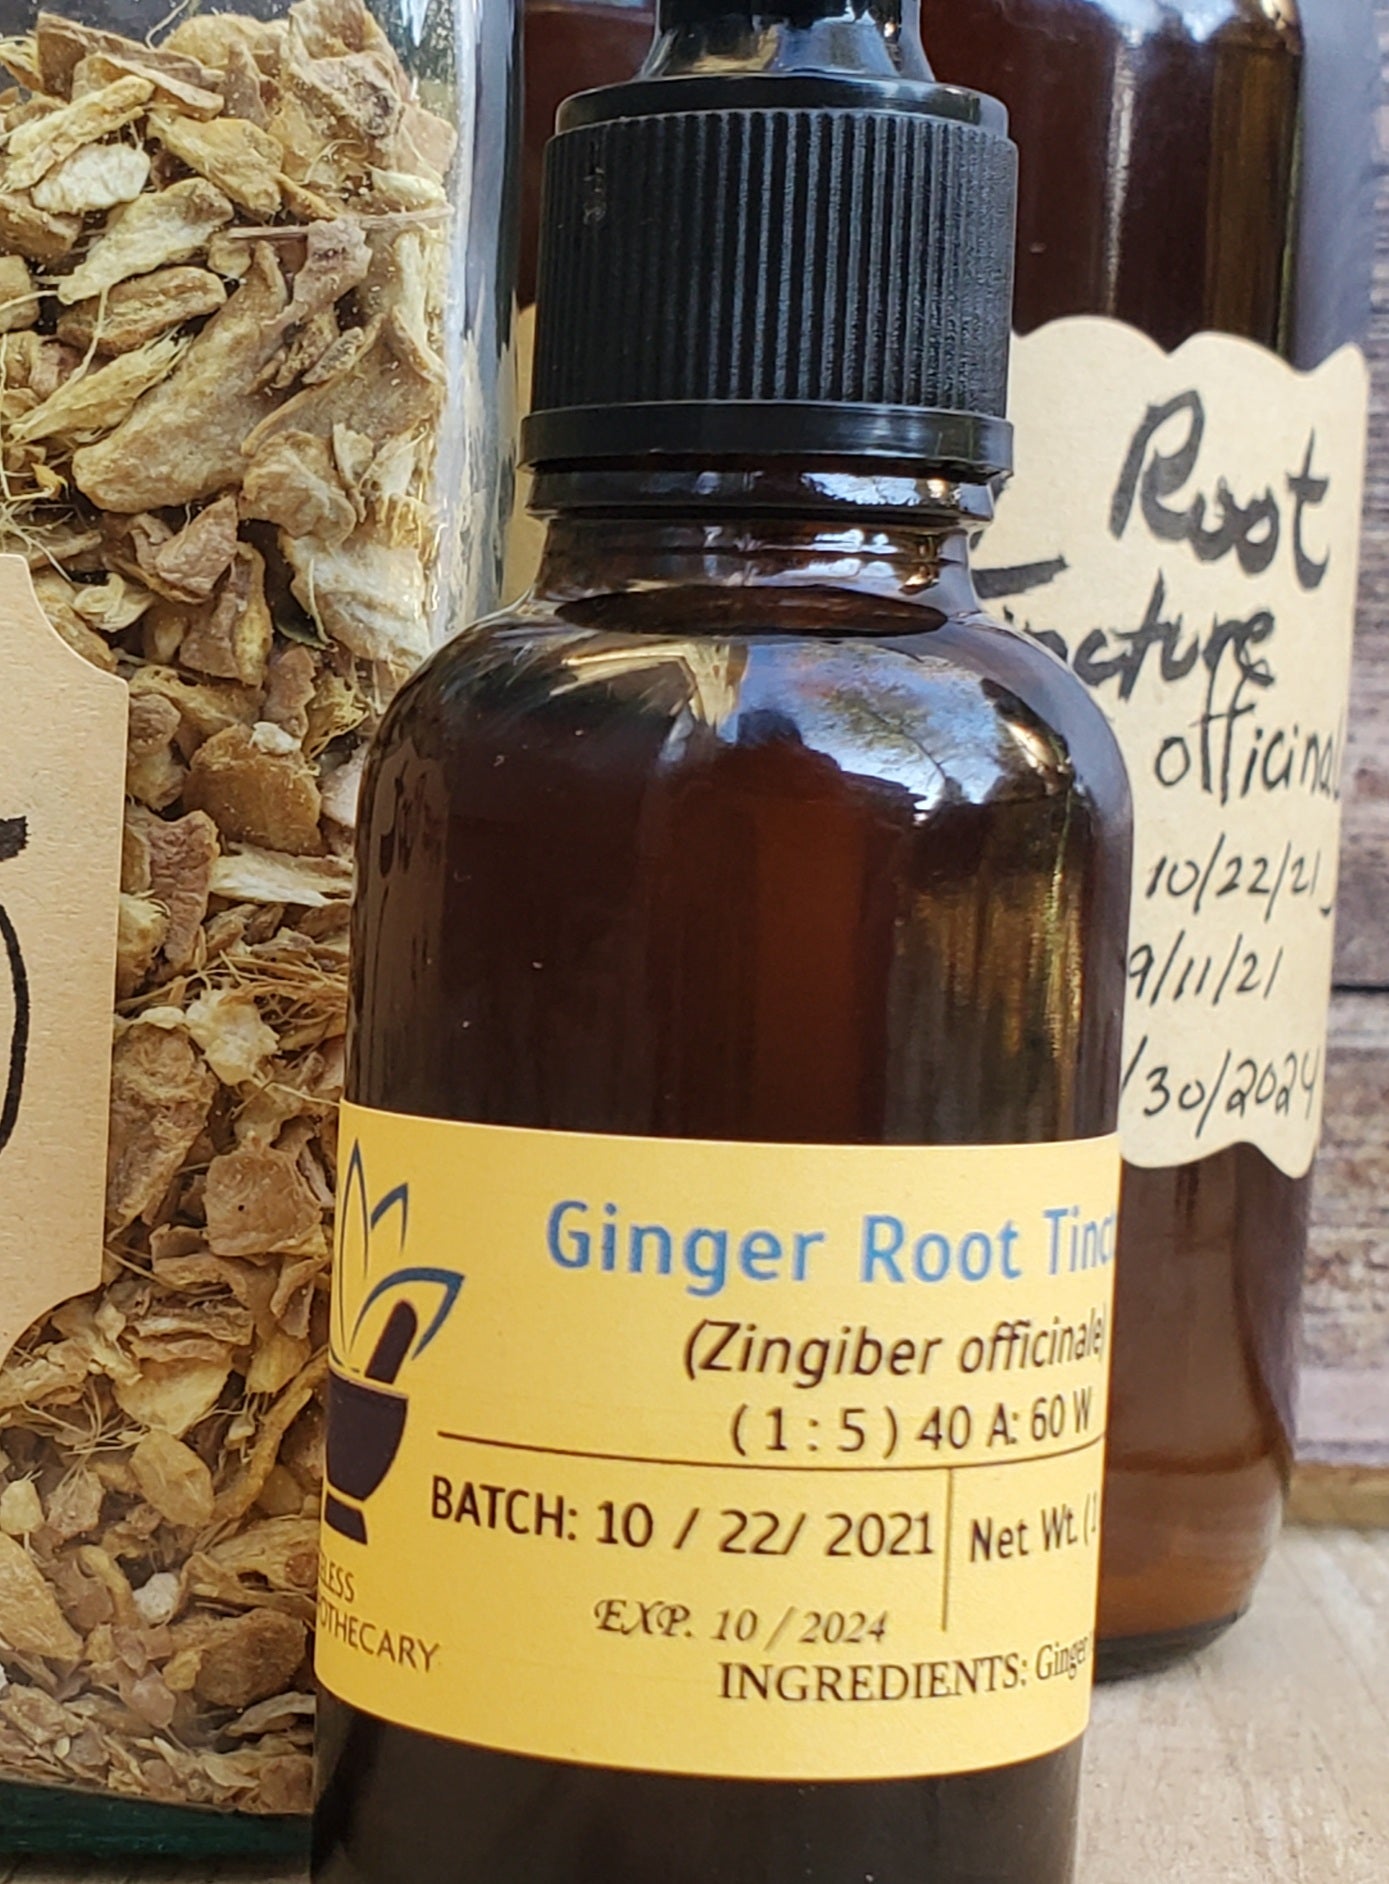 Ginger Root Tincture (Zingiber officinale)